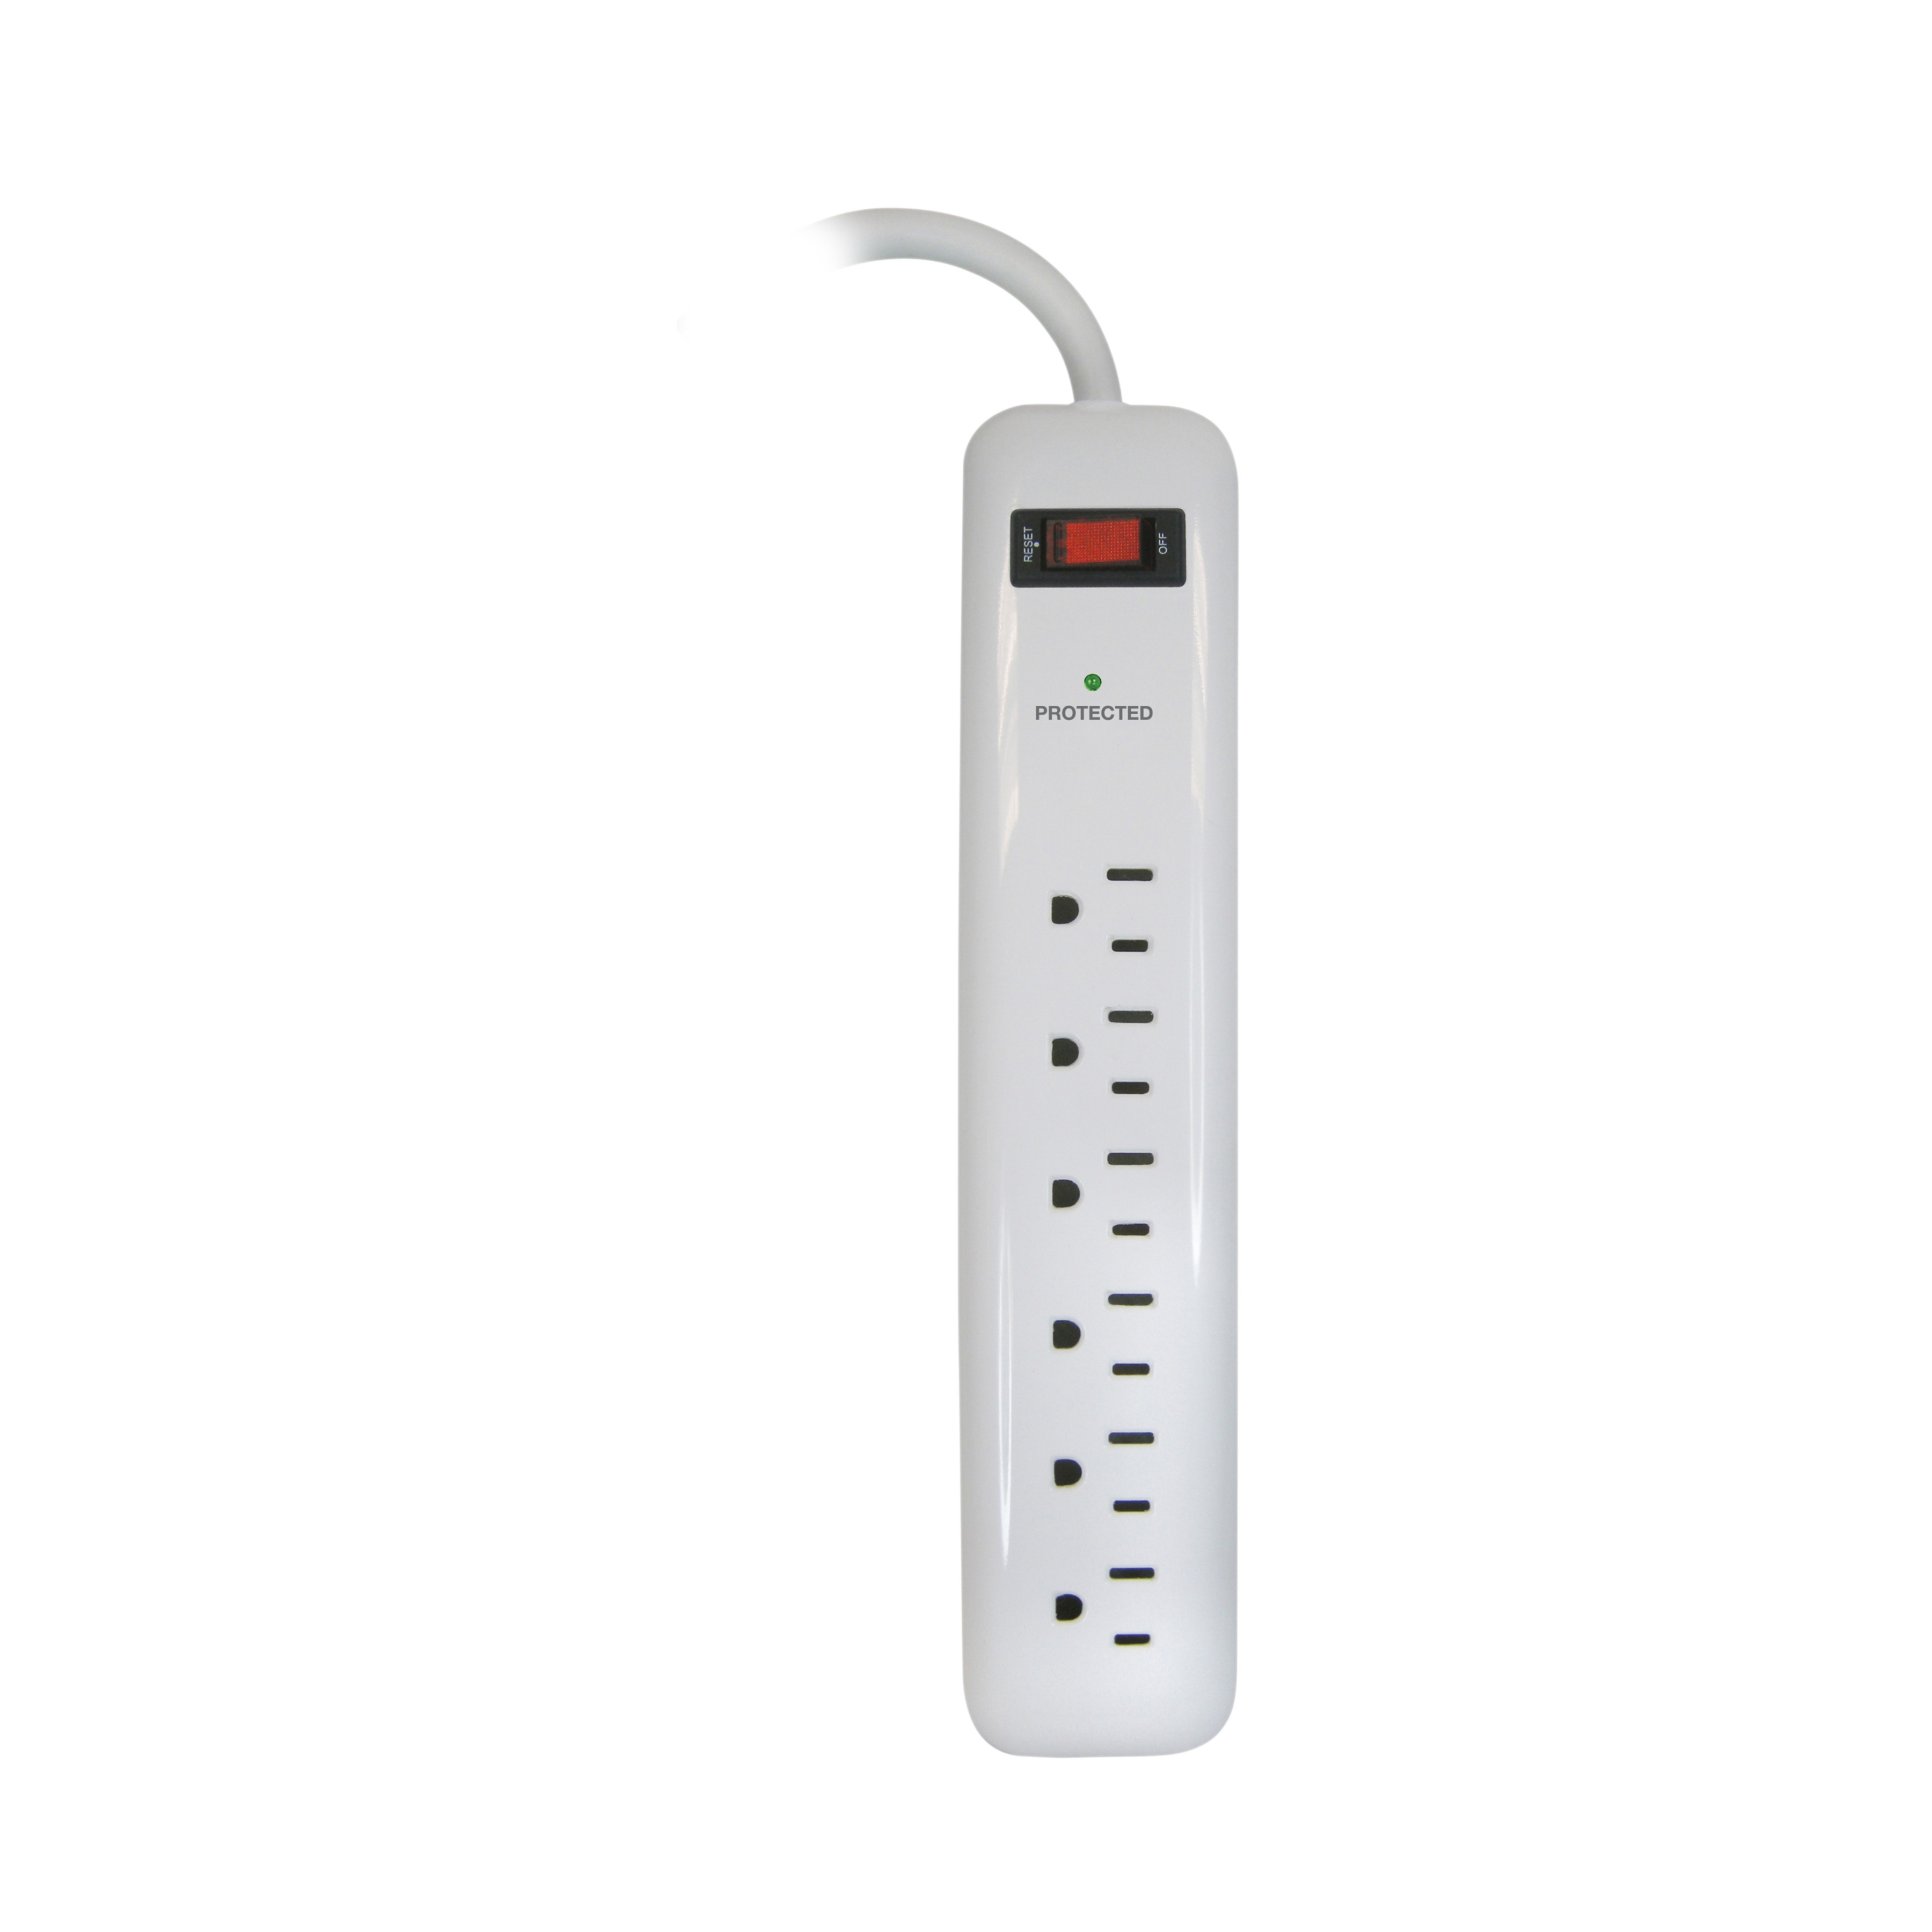 OR802013 Surge Protector Power Strip, 125 V, 15 A, White